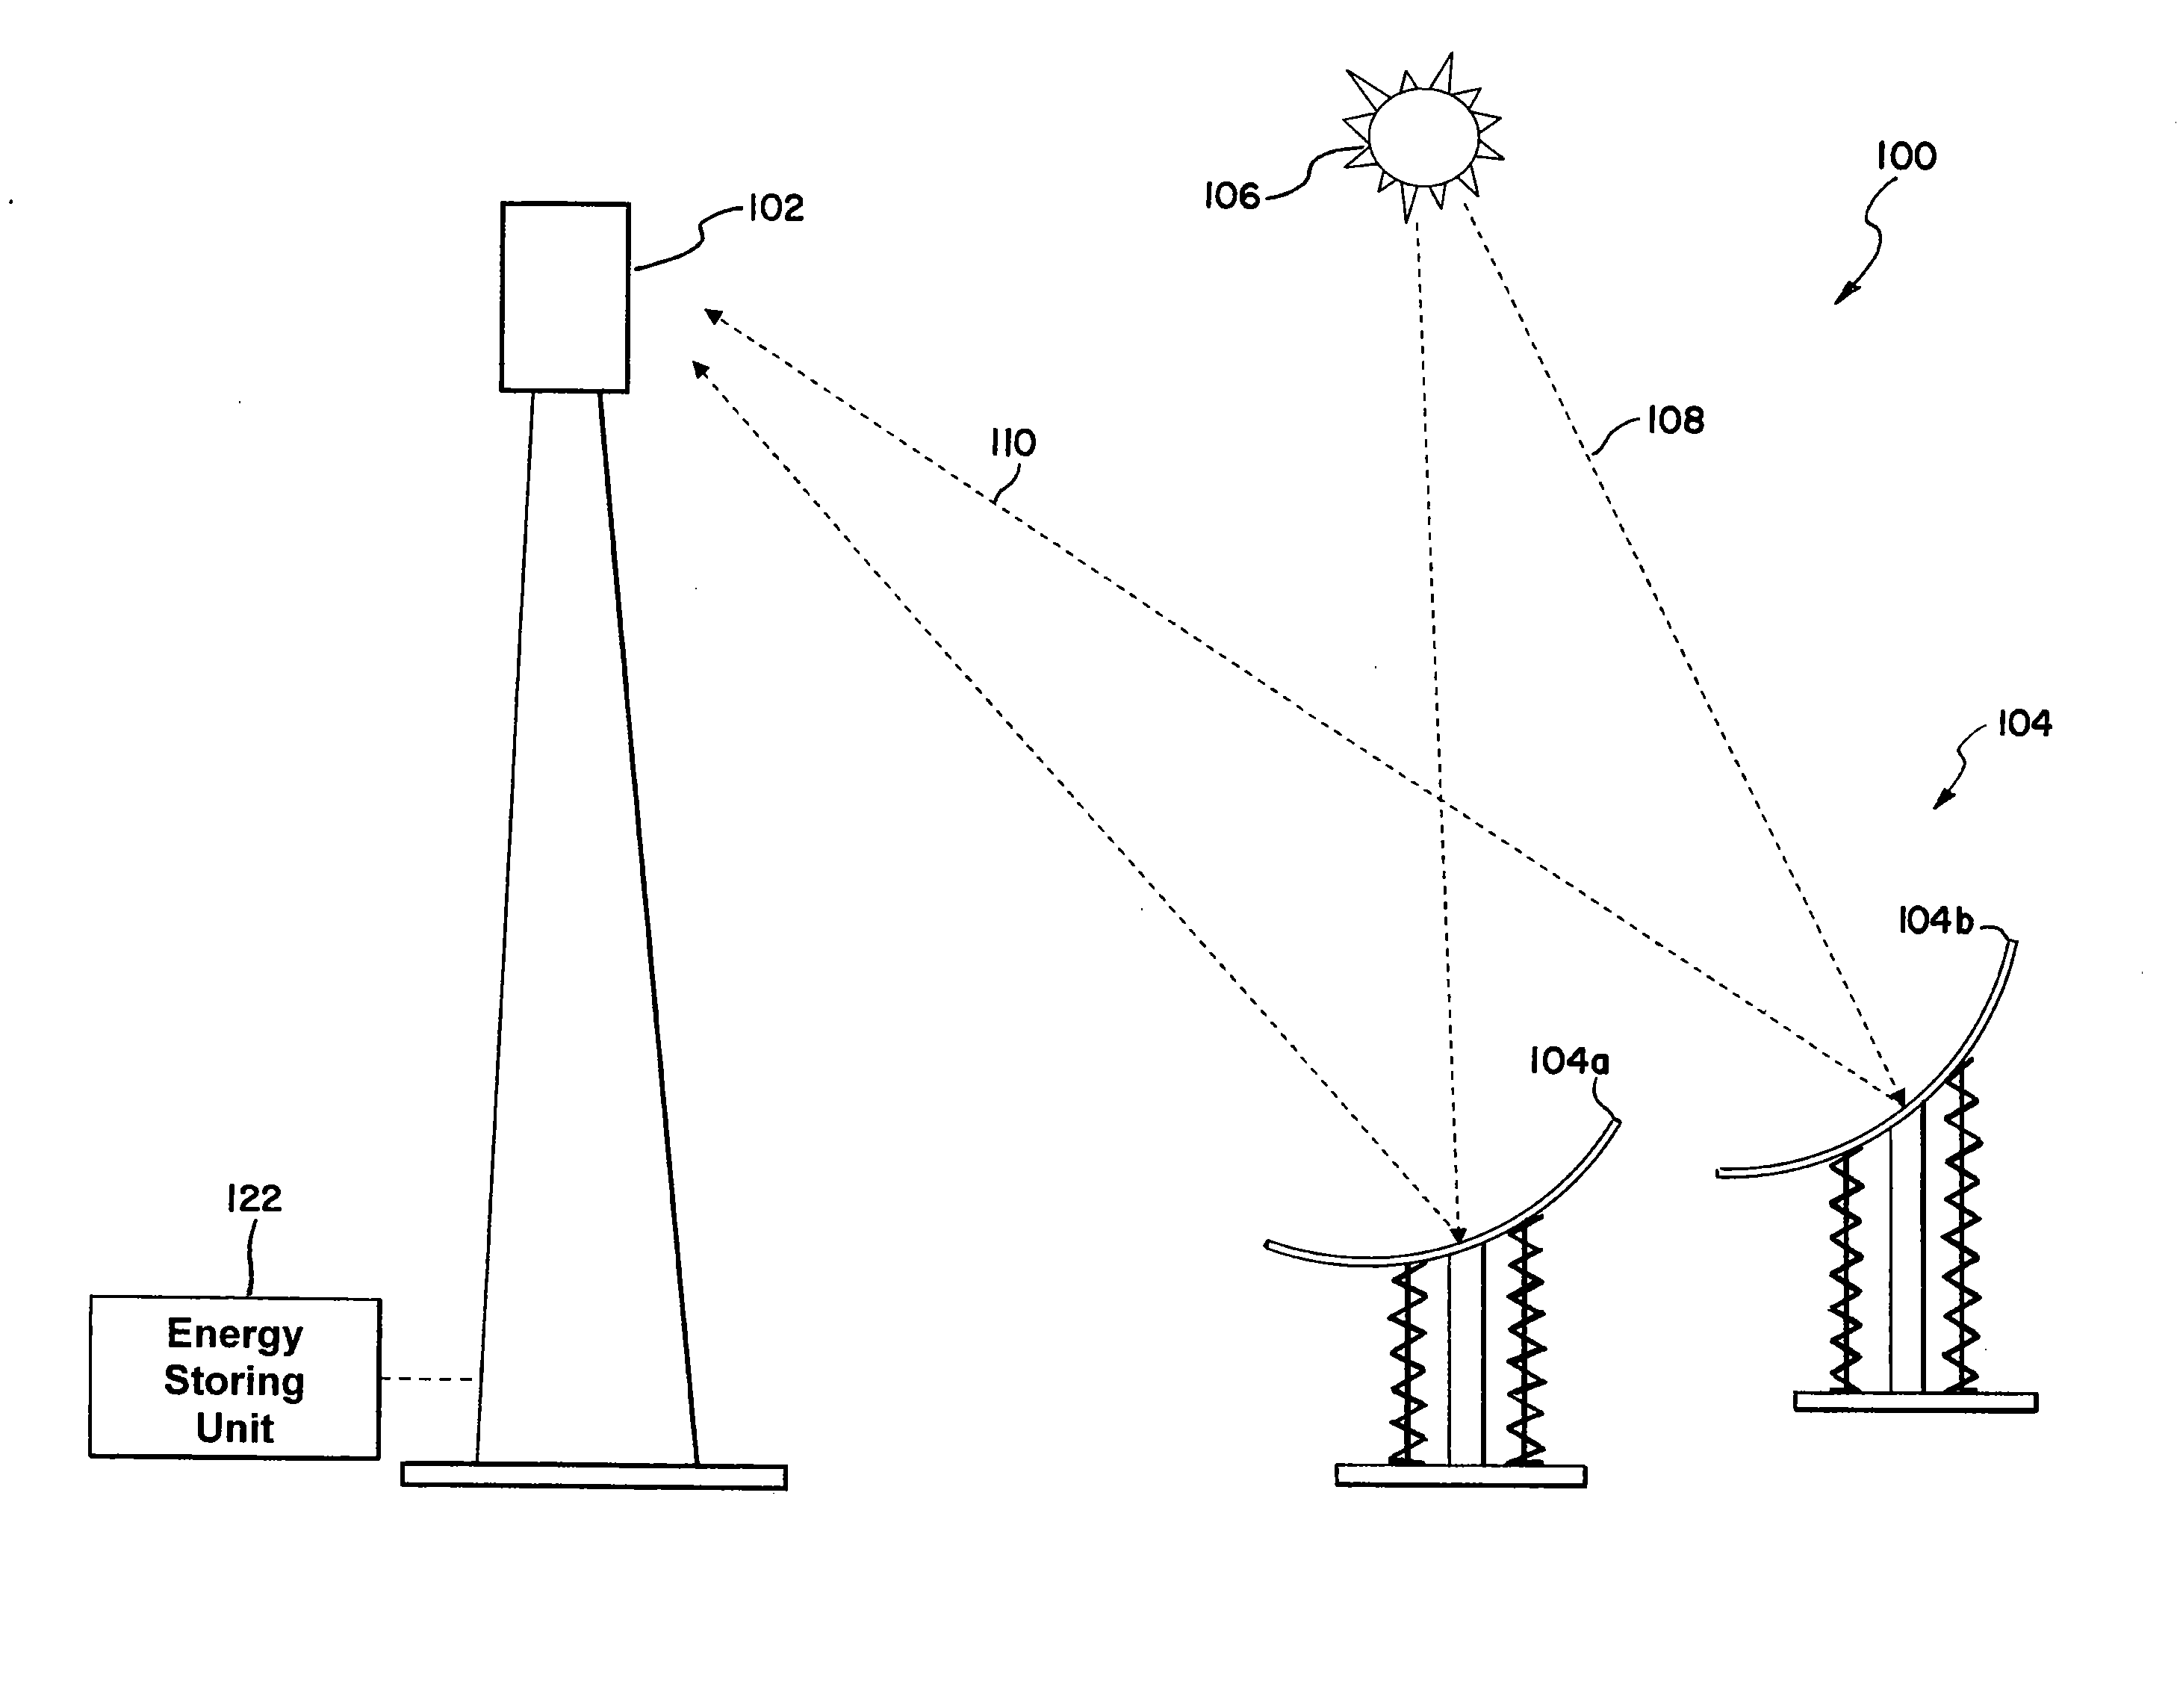 Method and apparatus to control a focal length of a curved reflector in real time